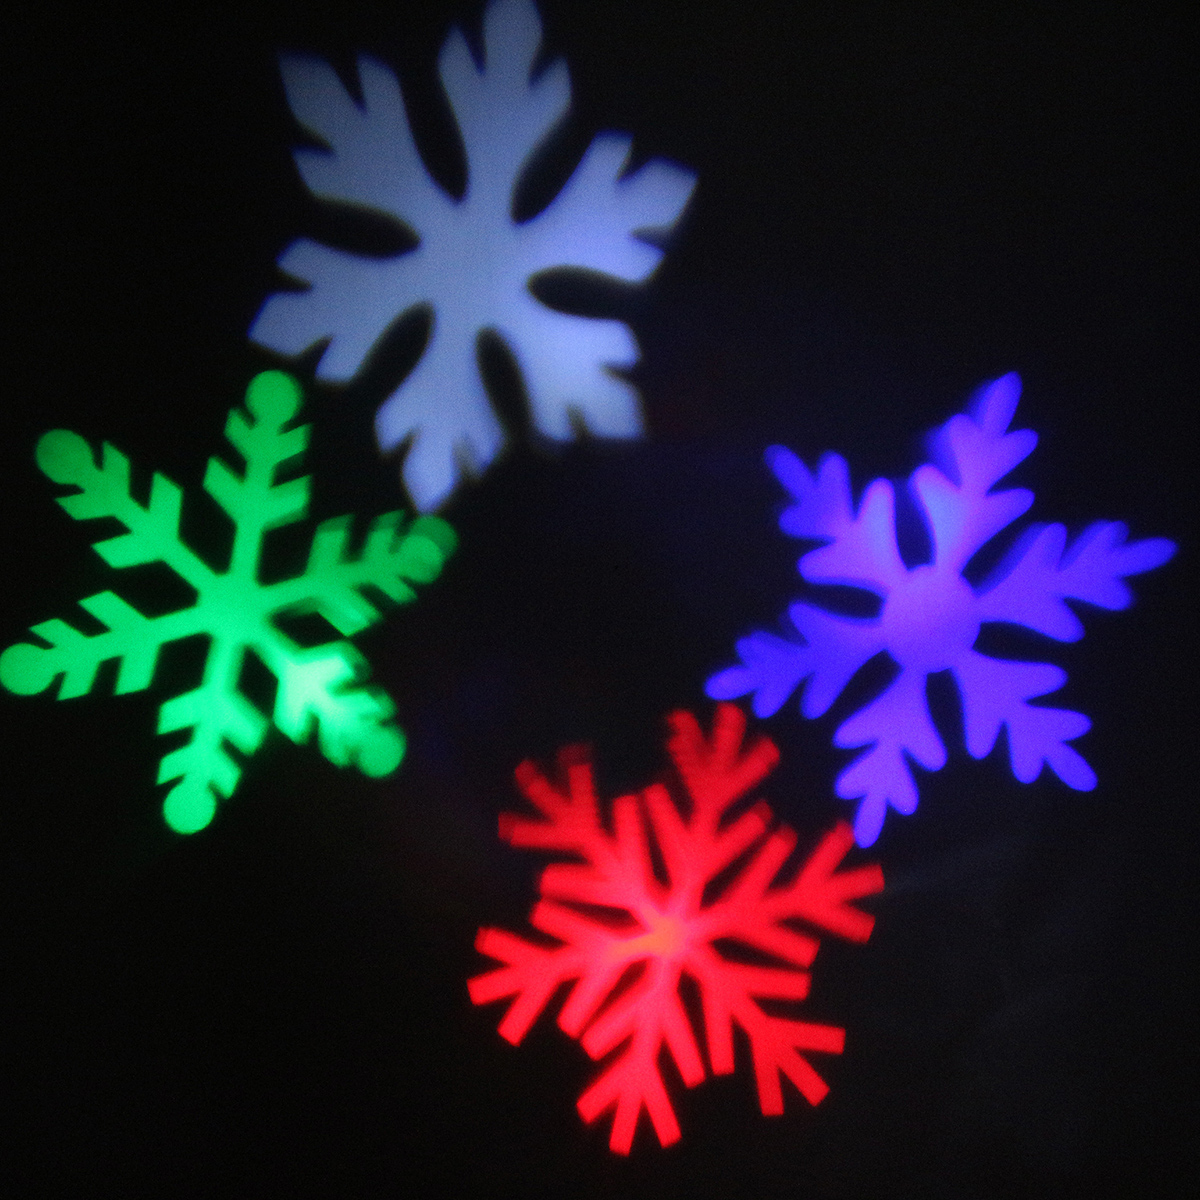 Waterproof-Snowflake-LED-Projector-Stage-Light-Lawn-Garden-Xmas-Party-Decoration-Lamp-Christmas-Deco-1111870-3